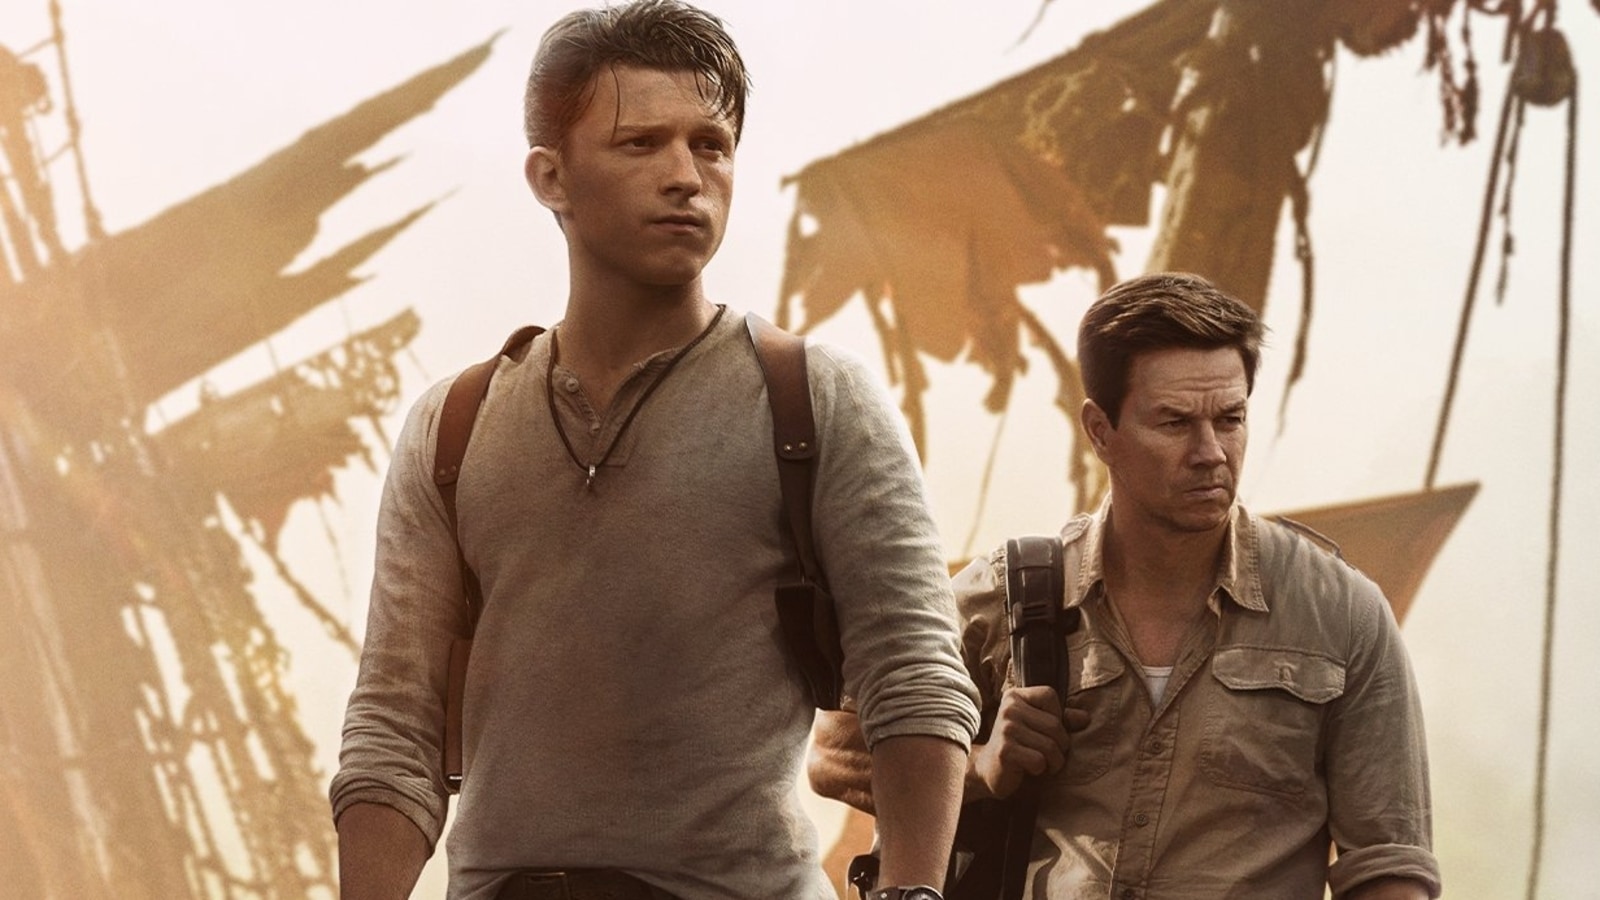 Uncharted' Gets China Release Date In March – Deadline